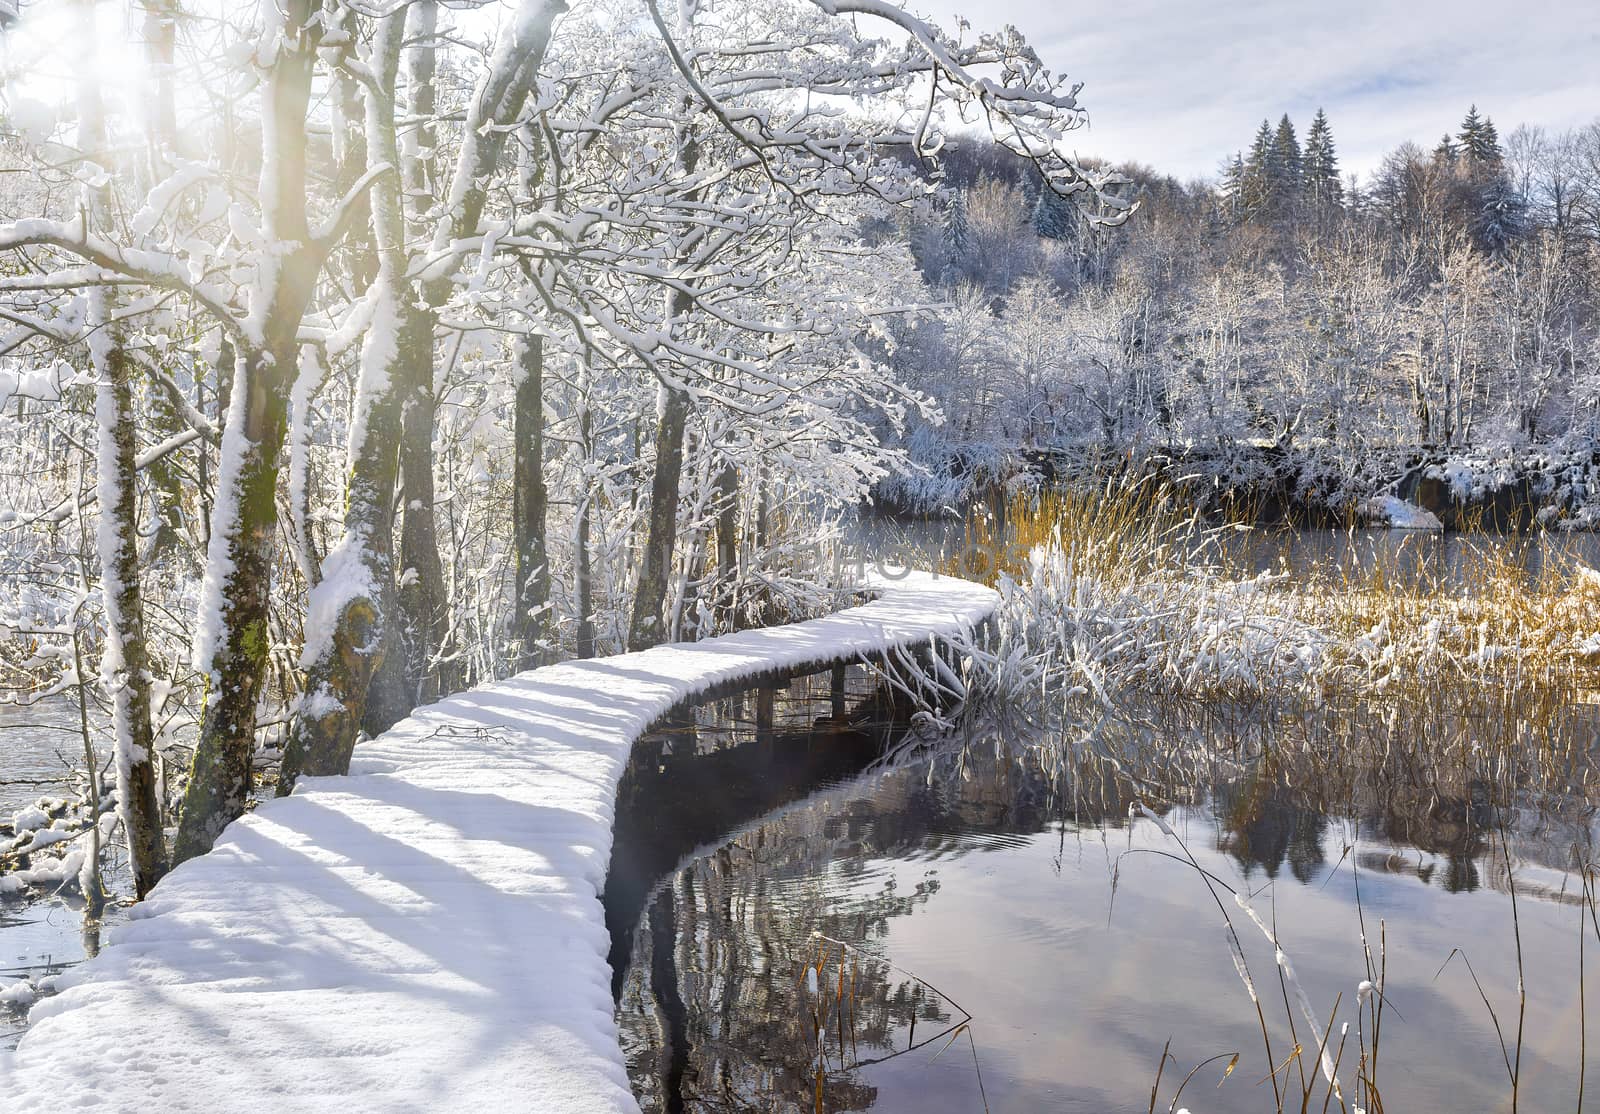 Snow-covered boardwalk over unfrozen lake with beautiful reflections in it against snowy winter forest.